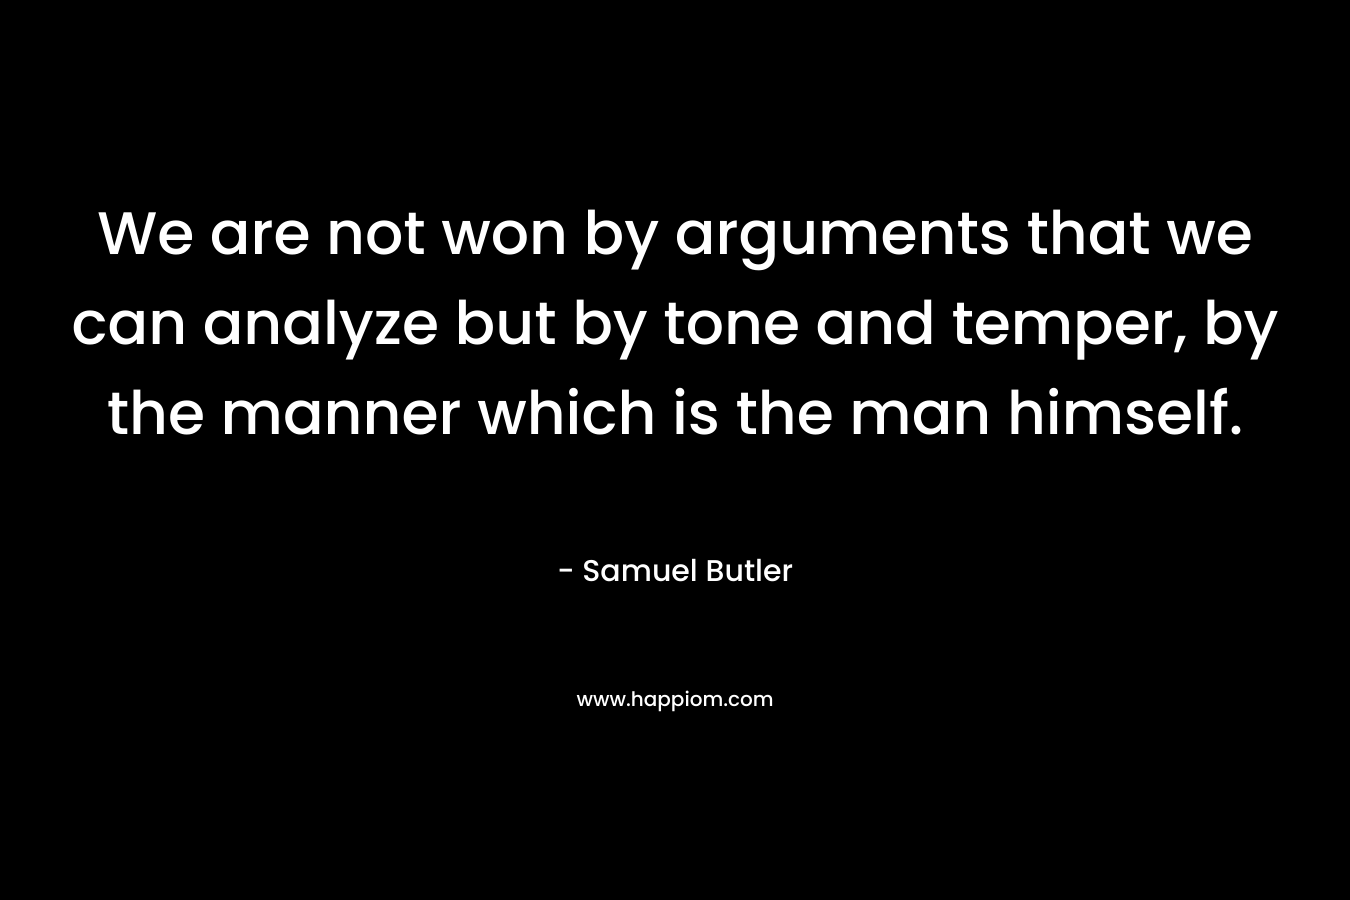 We are not won by arguments that we can analyze but by tone and temper, by the manner which is the man himself. – Samuel Butler